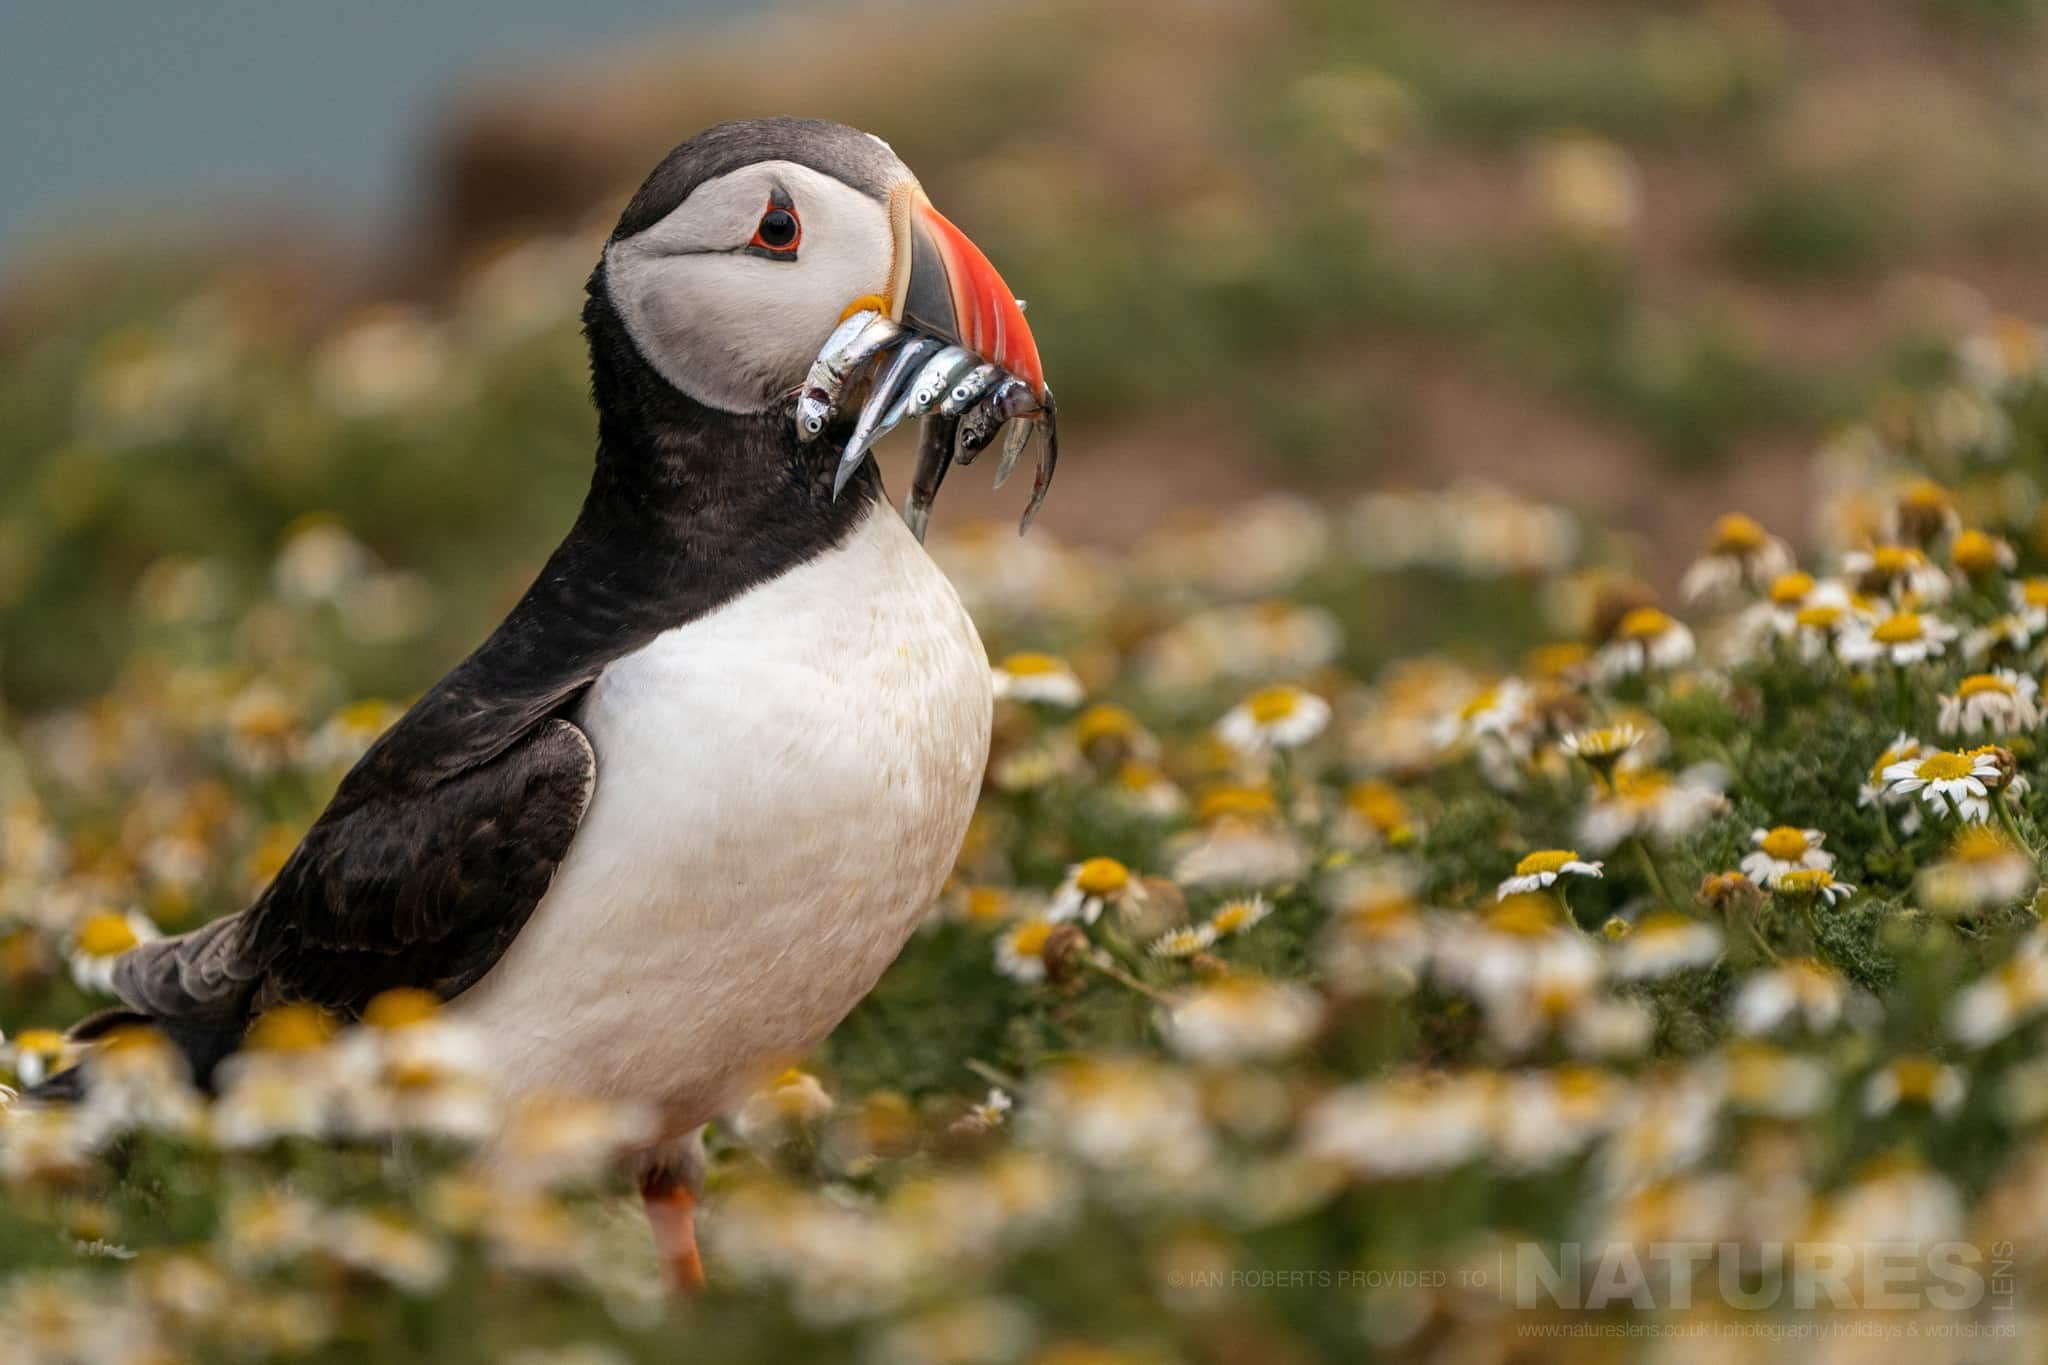 One Of The Puffins Returns To It'S Burrow With A Beak Full Of Sand Eels This Image Was Captured By Ian Roberts During The Natureslens Welsh Puffins Of Skomer Island Photography Holiday